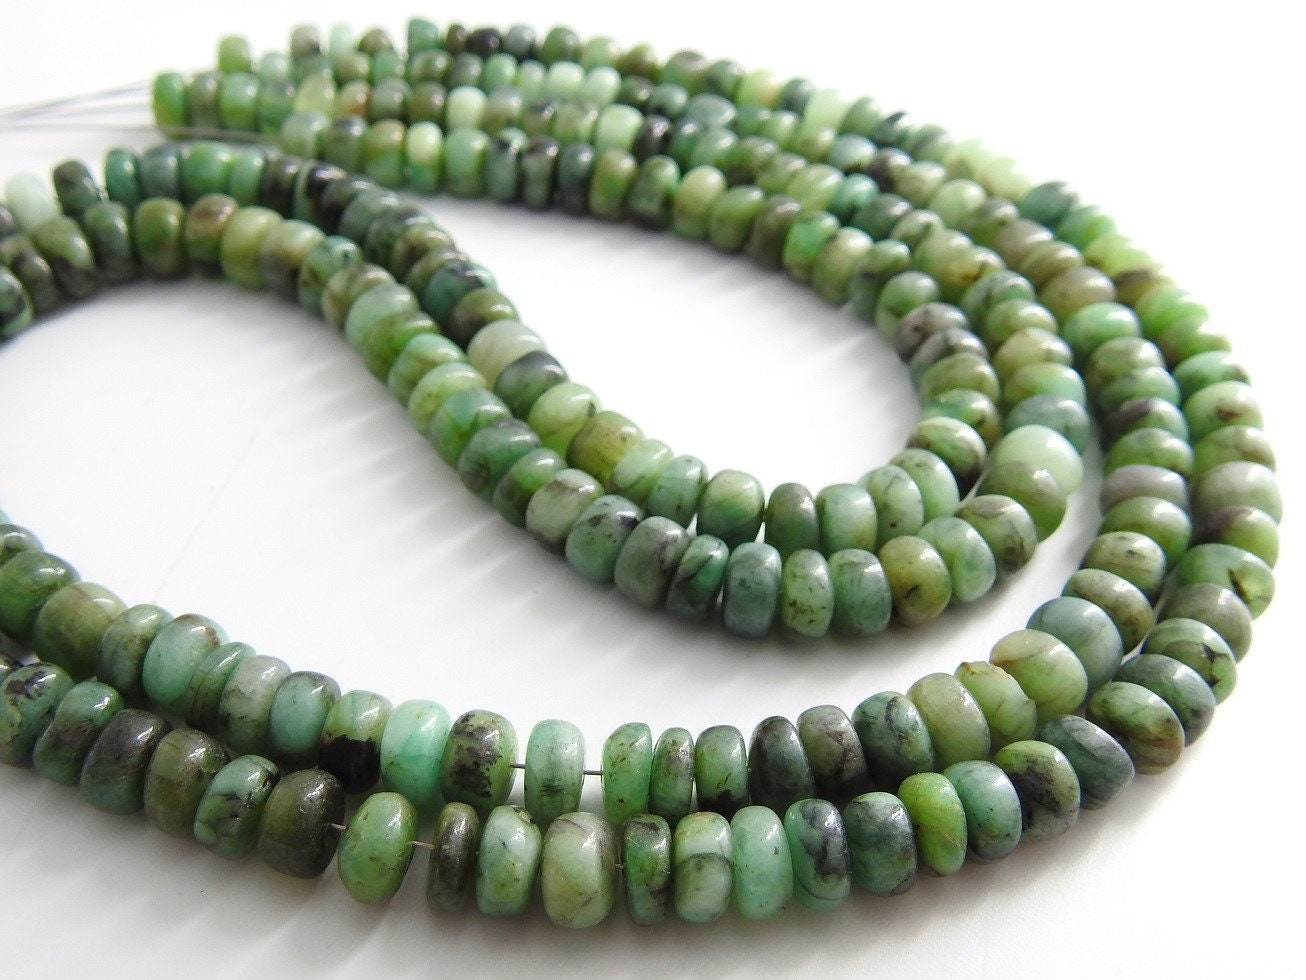 Emerald Smooth Roundel Bead,Shaded,Loose Stone,Handmade,Wholesale Price,New Arrival,18Inch Strand 100%Natural PME(B12) | Save 33% - Rajasthan Living 18